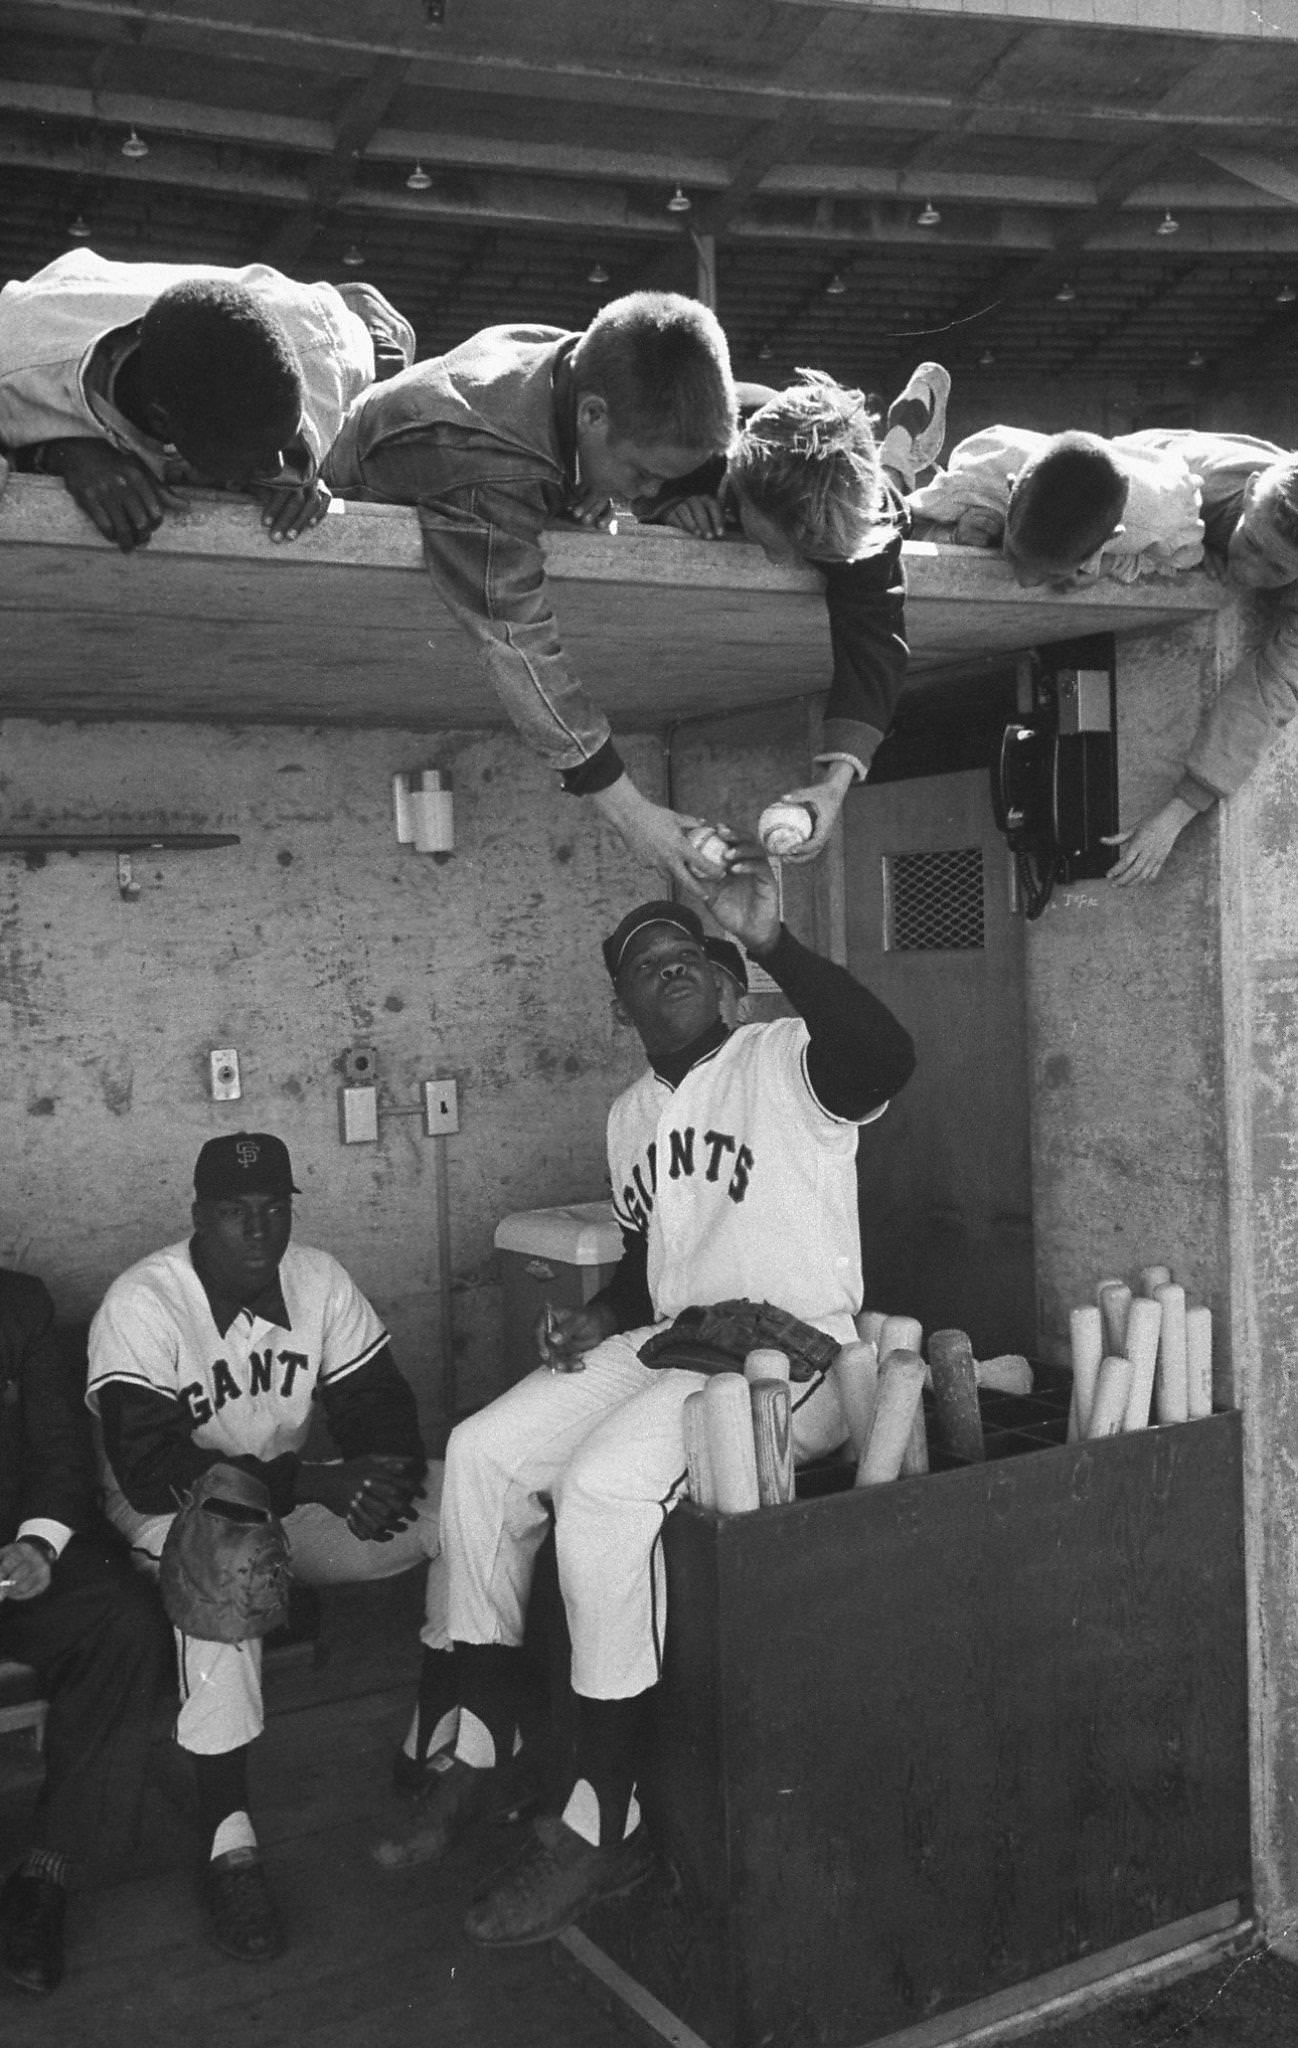 Little fans getting autographs from Willie Mays and Willie McCovey, 1960